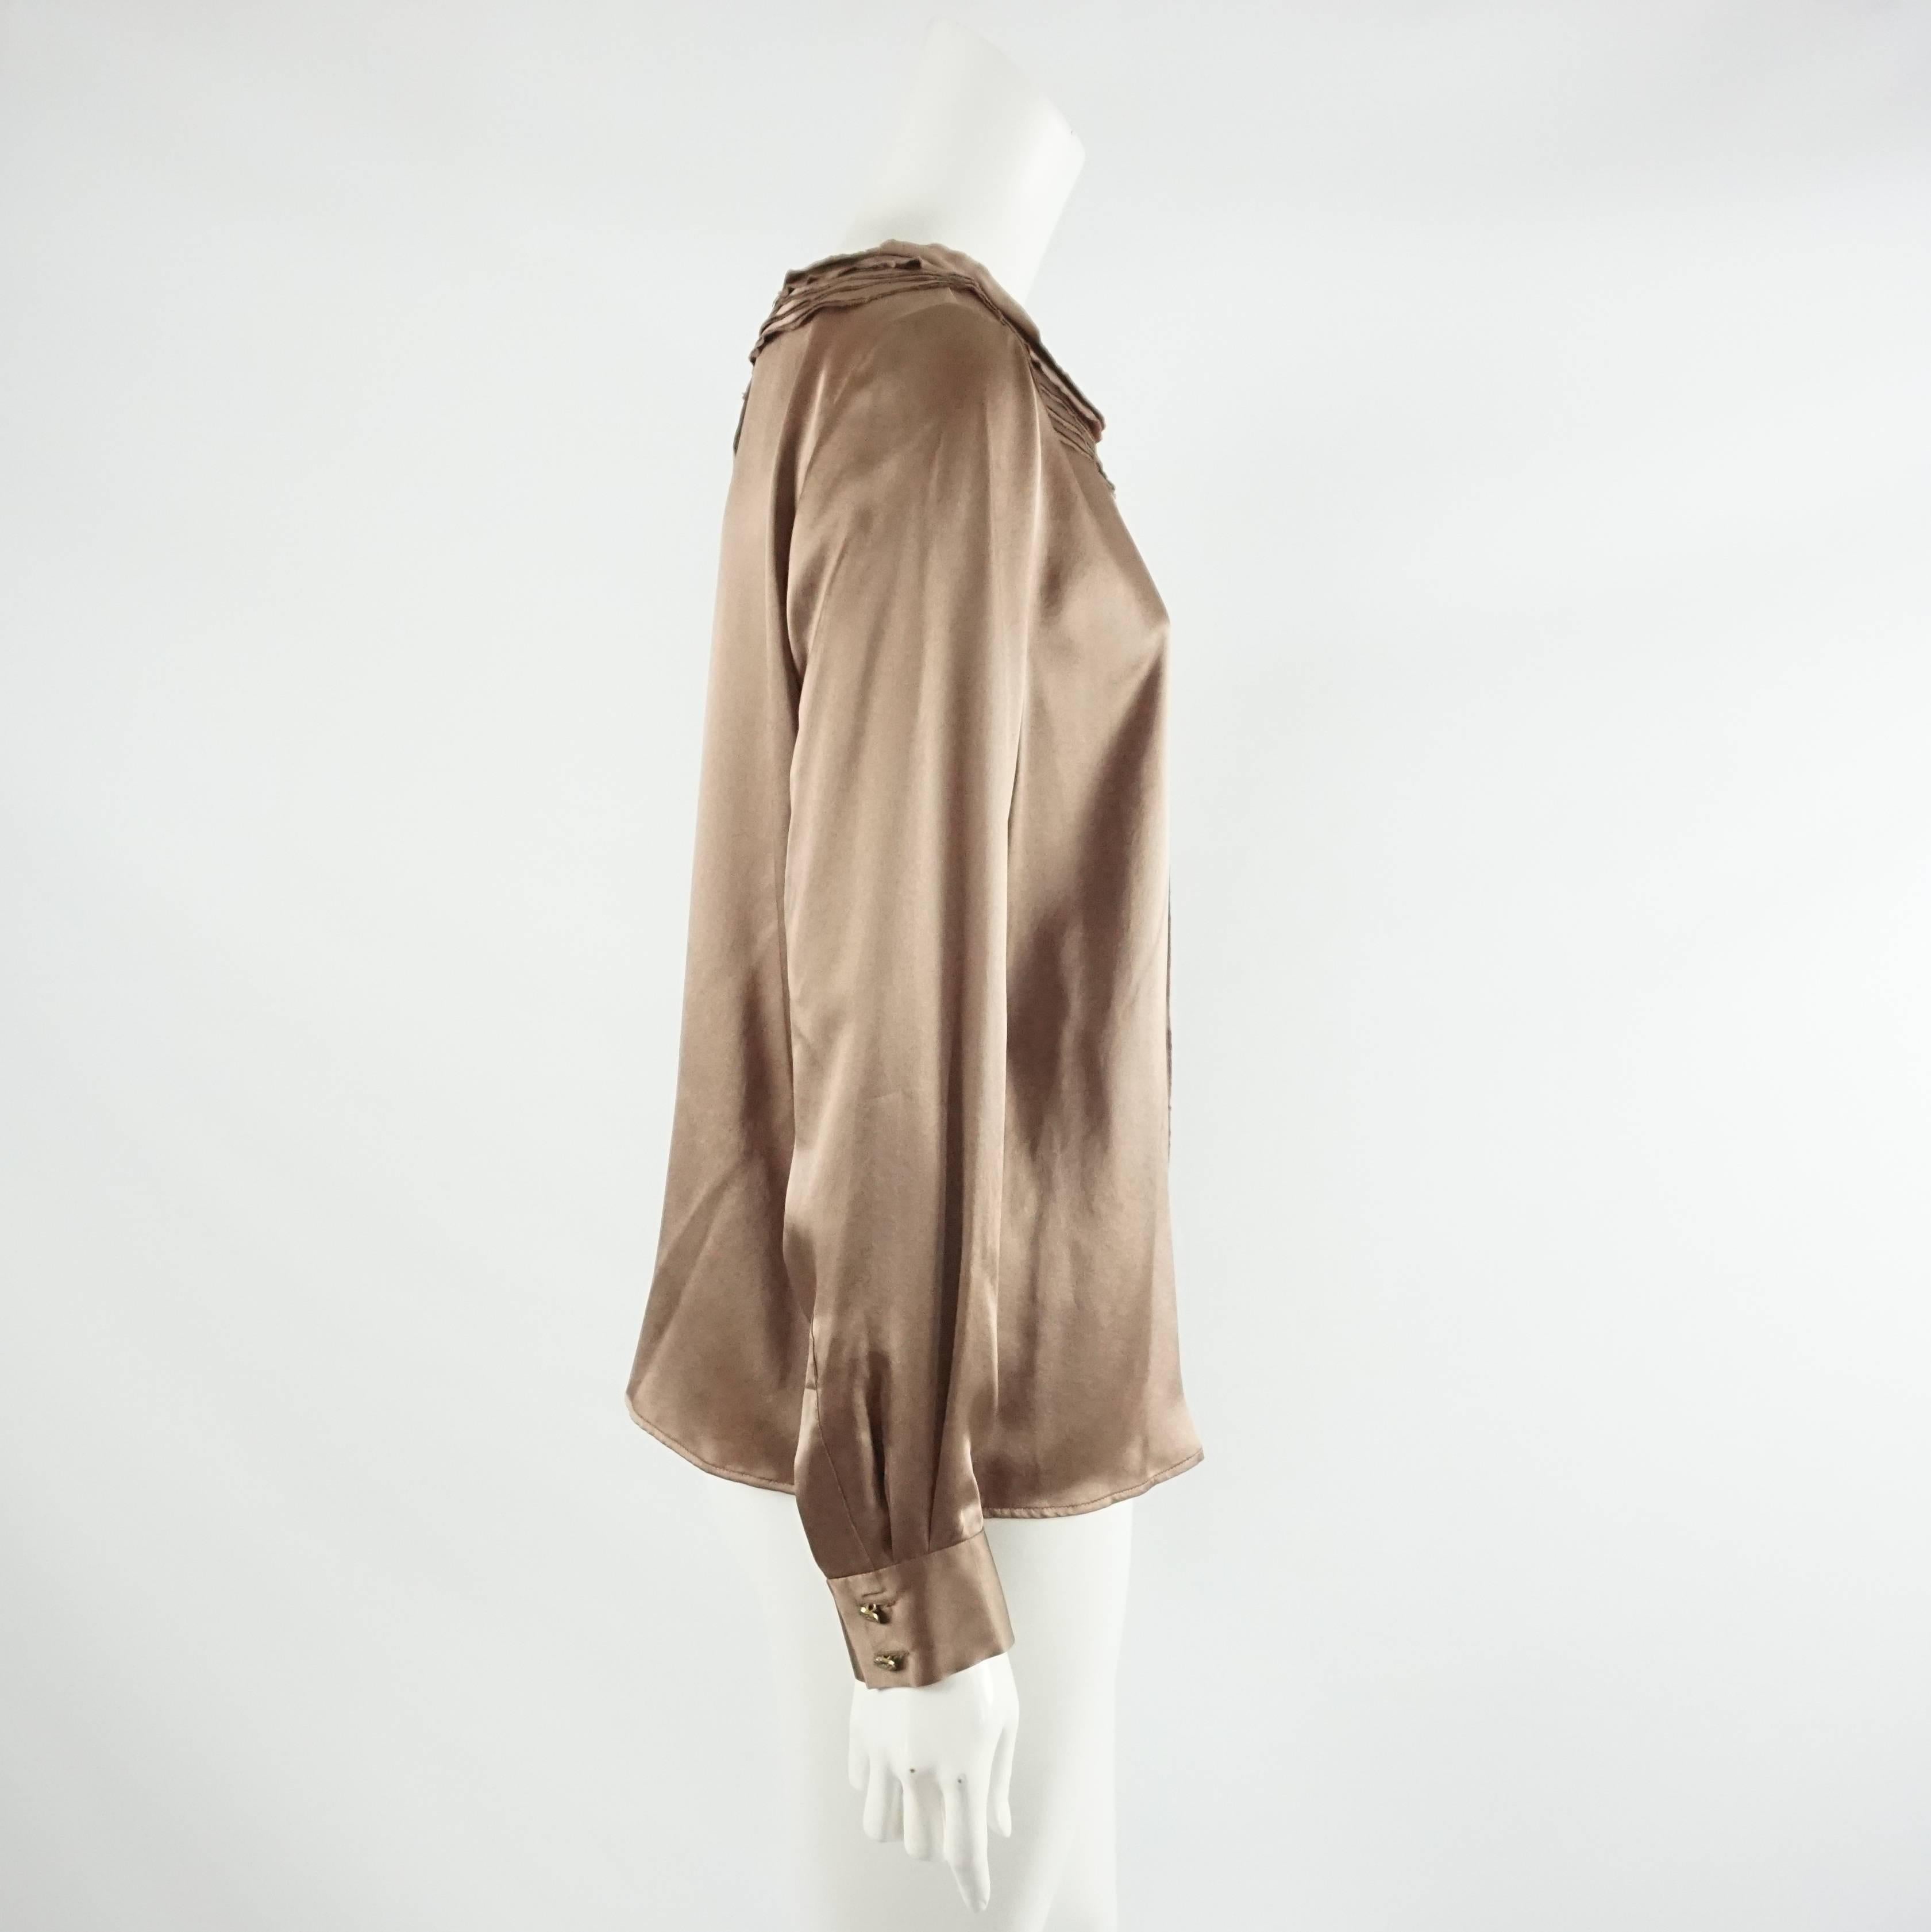 Oscar de la Renta Brown Silk Top-10 NWT. This gorgeous top is made of silk and is a milk chocolate brown color. The top is long sleeved with cuffed ends and has a soft neckline. There is trim detail going down the front as well as around the